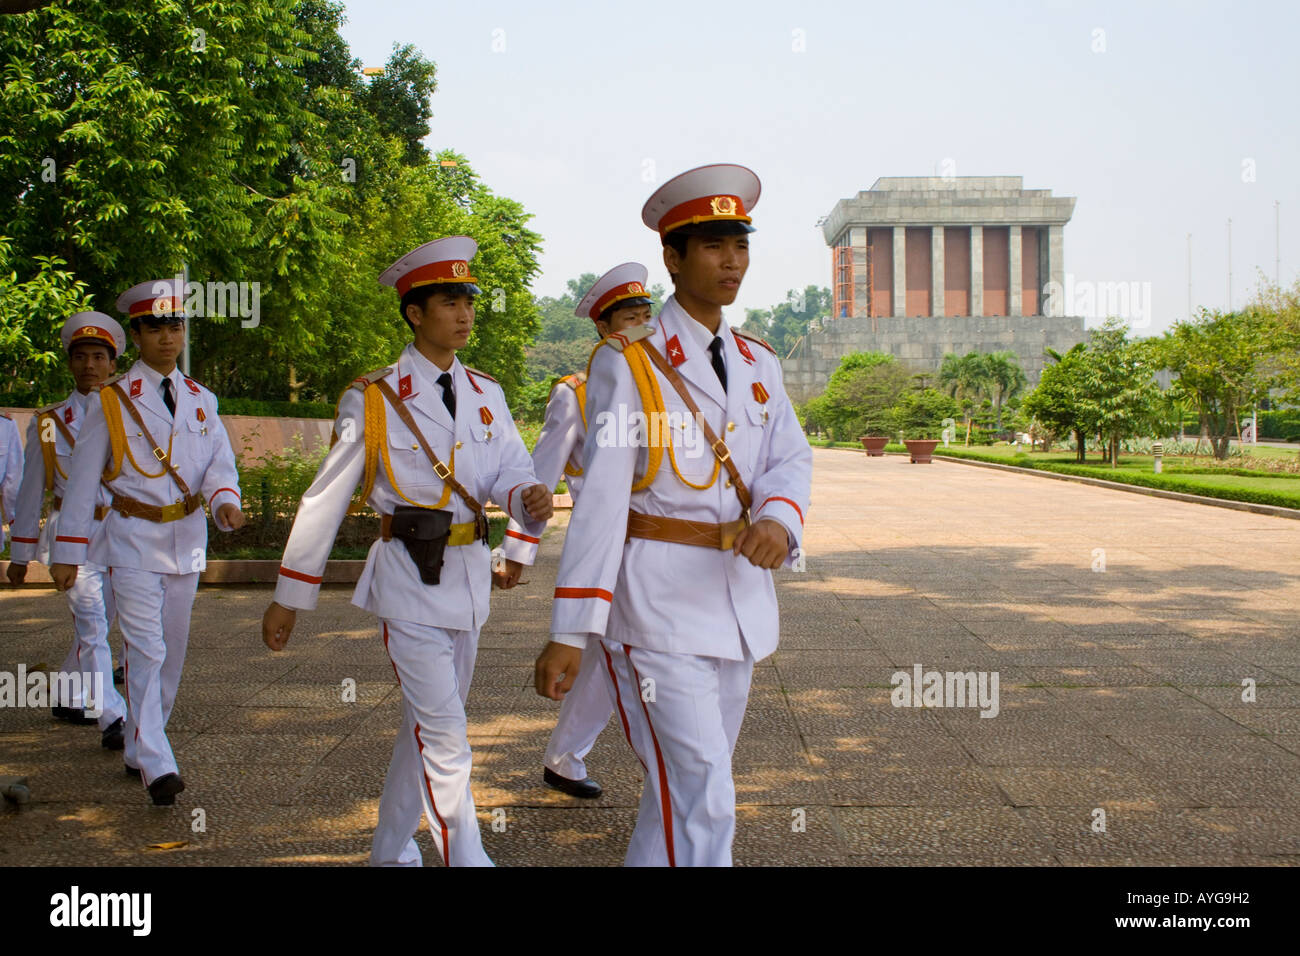 Elite Guards Provide Security at and around the Memorial Tomb of Ho Chi Minh Hanoi Vietnam Stock Photo